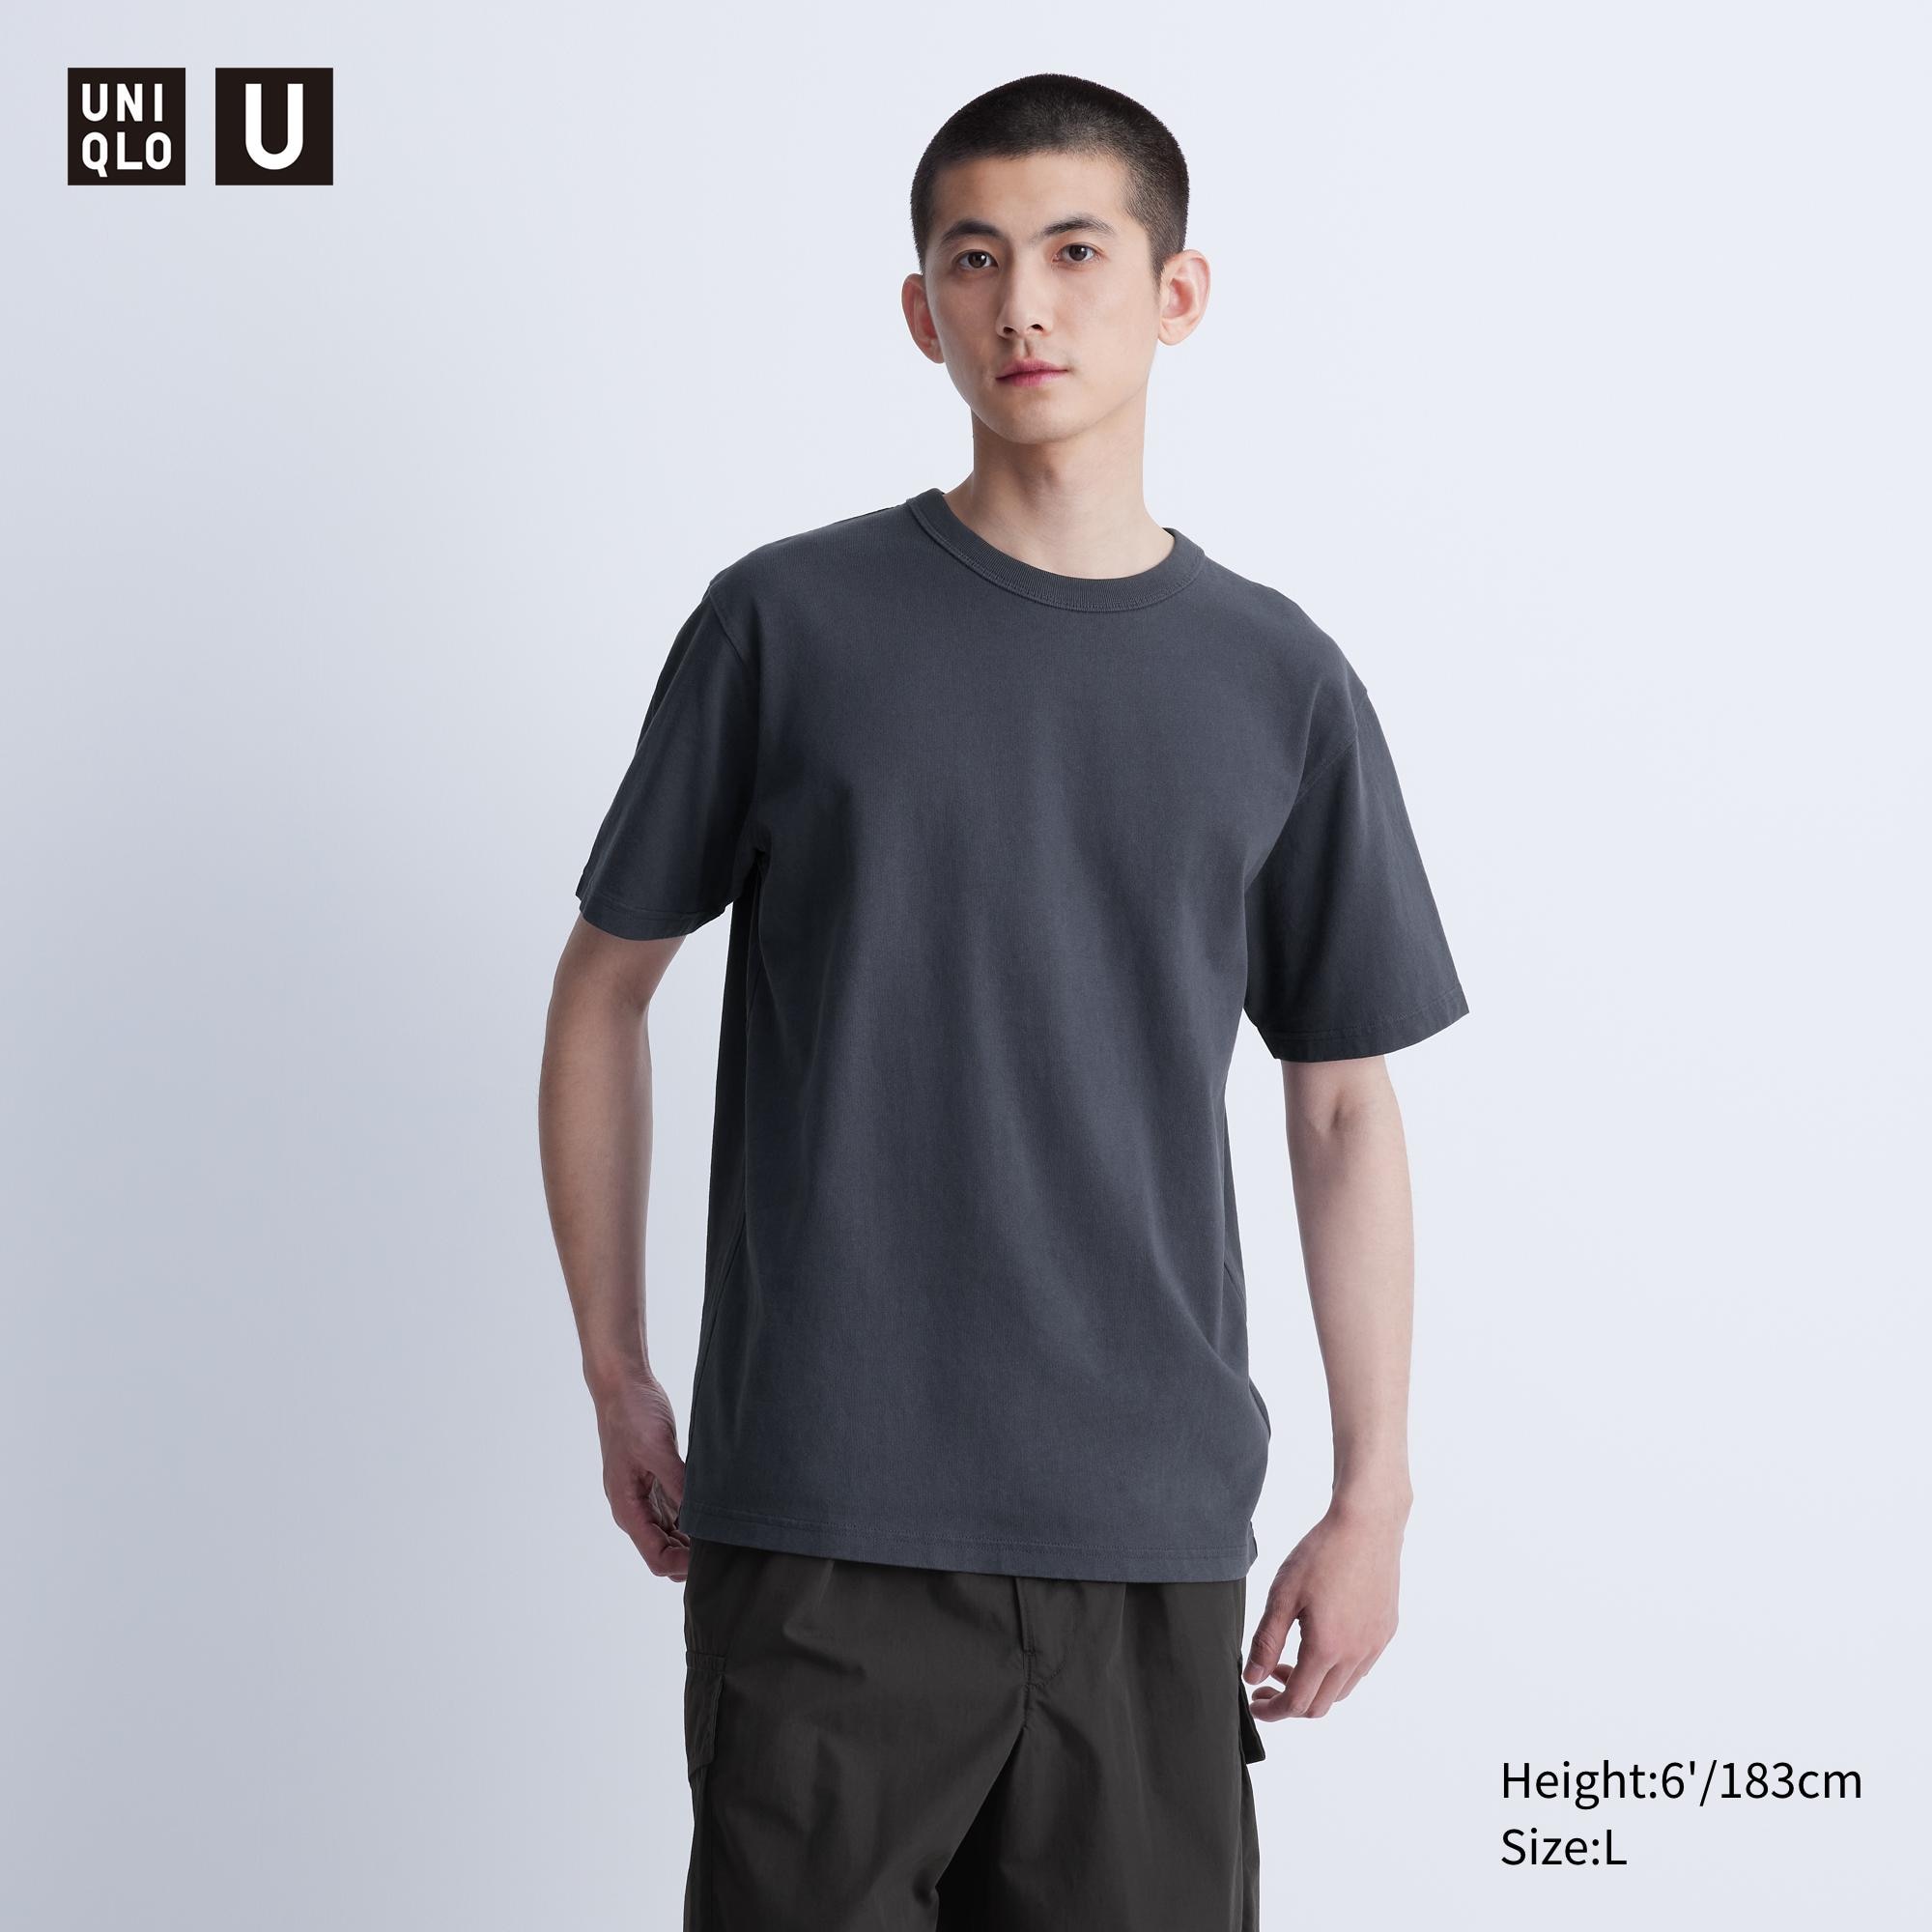 uniqloindonesia on X: Check out what your UNIQLO T-Shirt says about you!  #UniqloIndonesia #UniqloLifeWear  / X